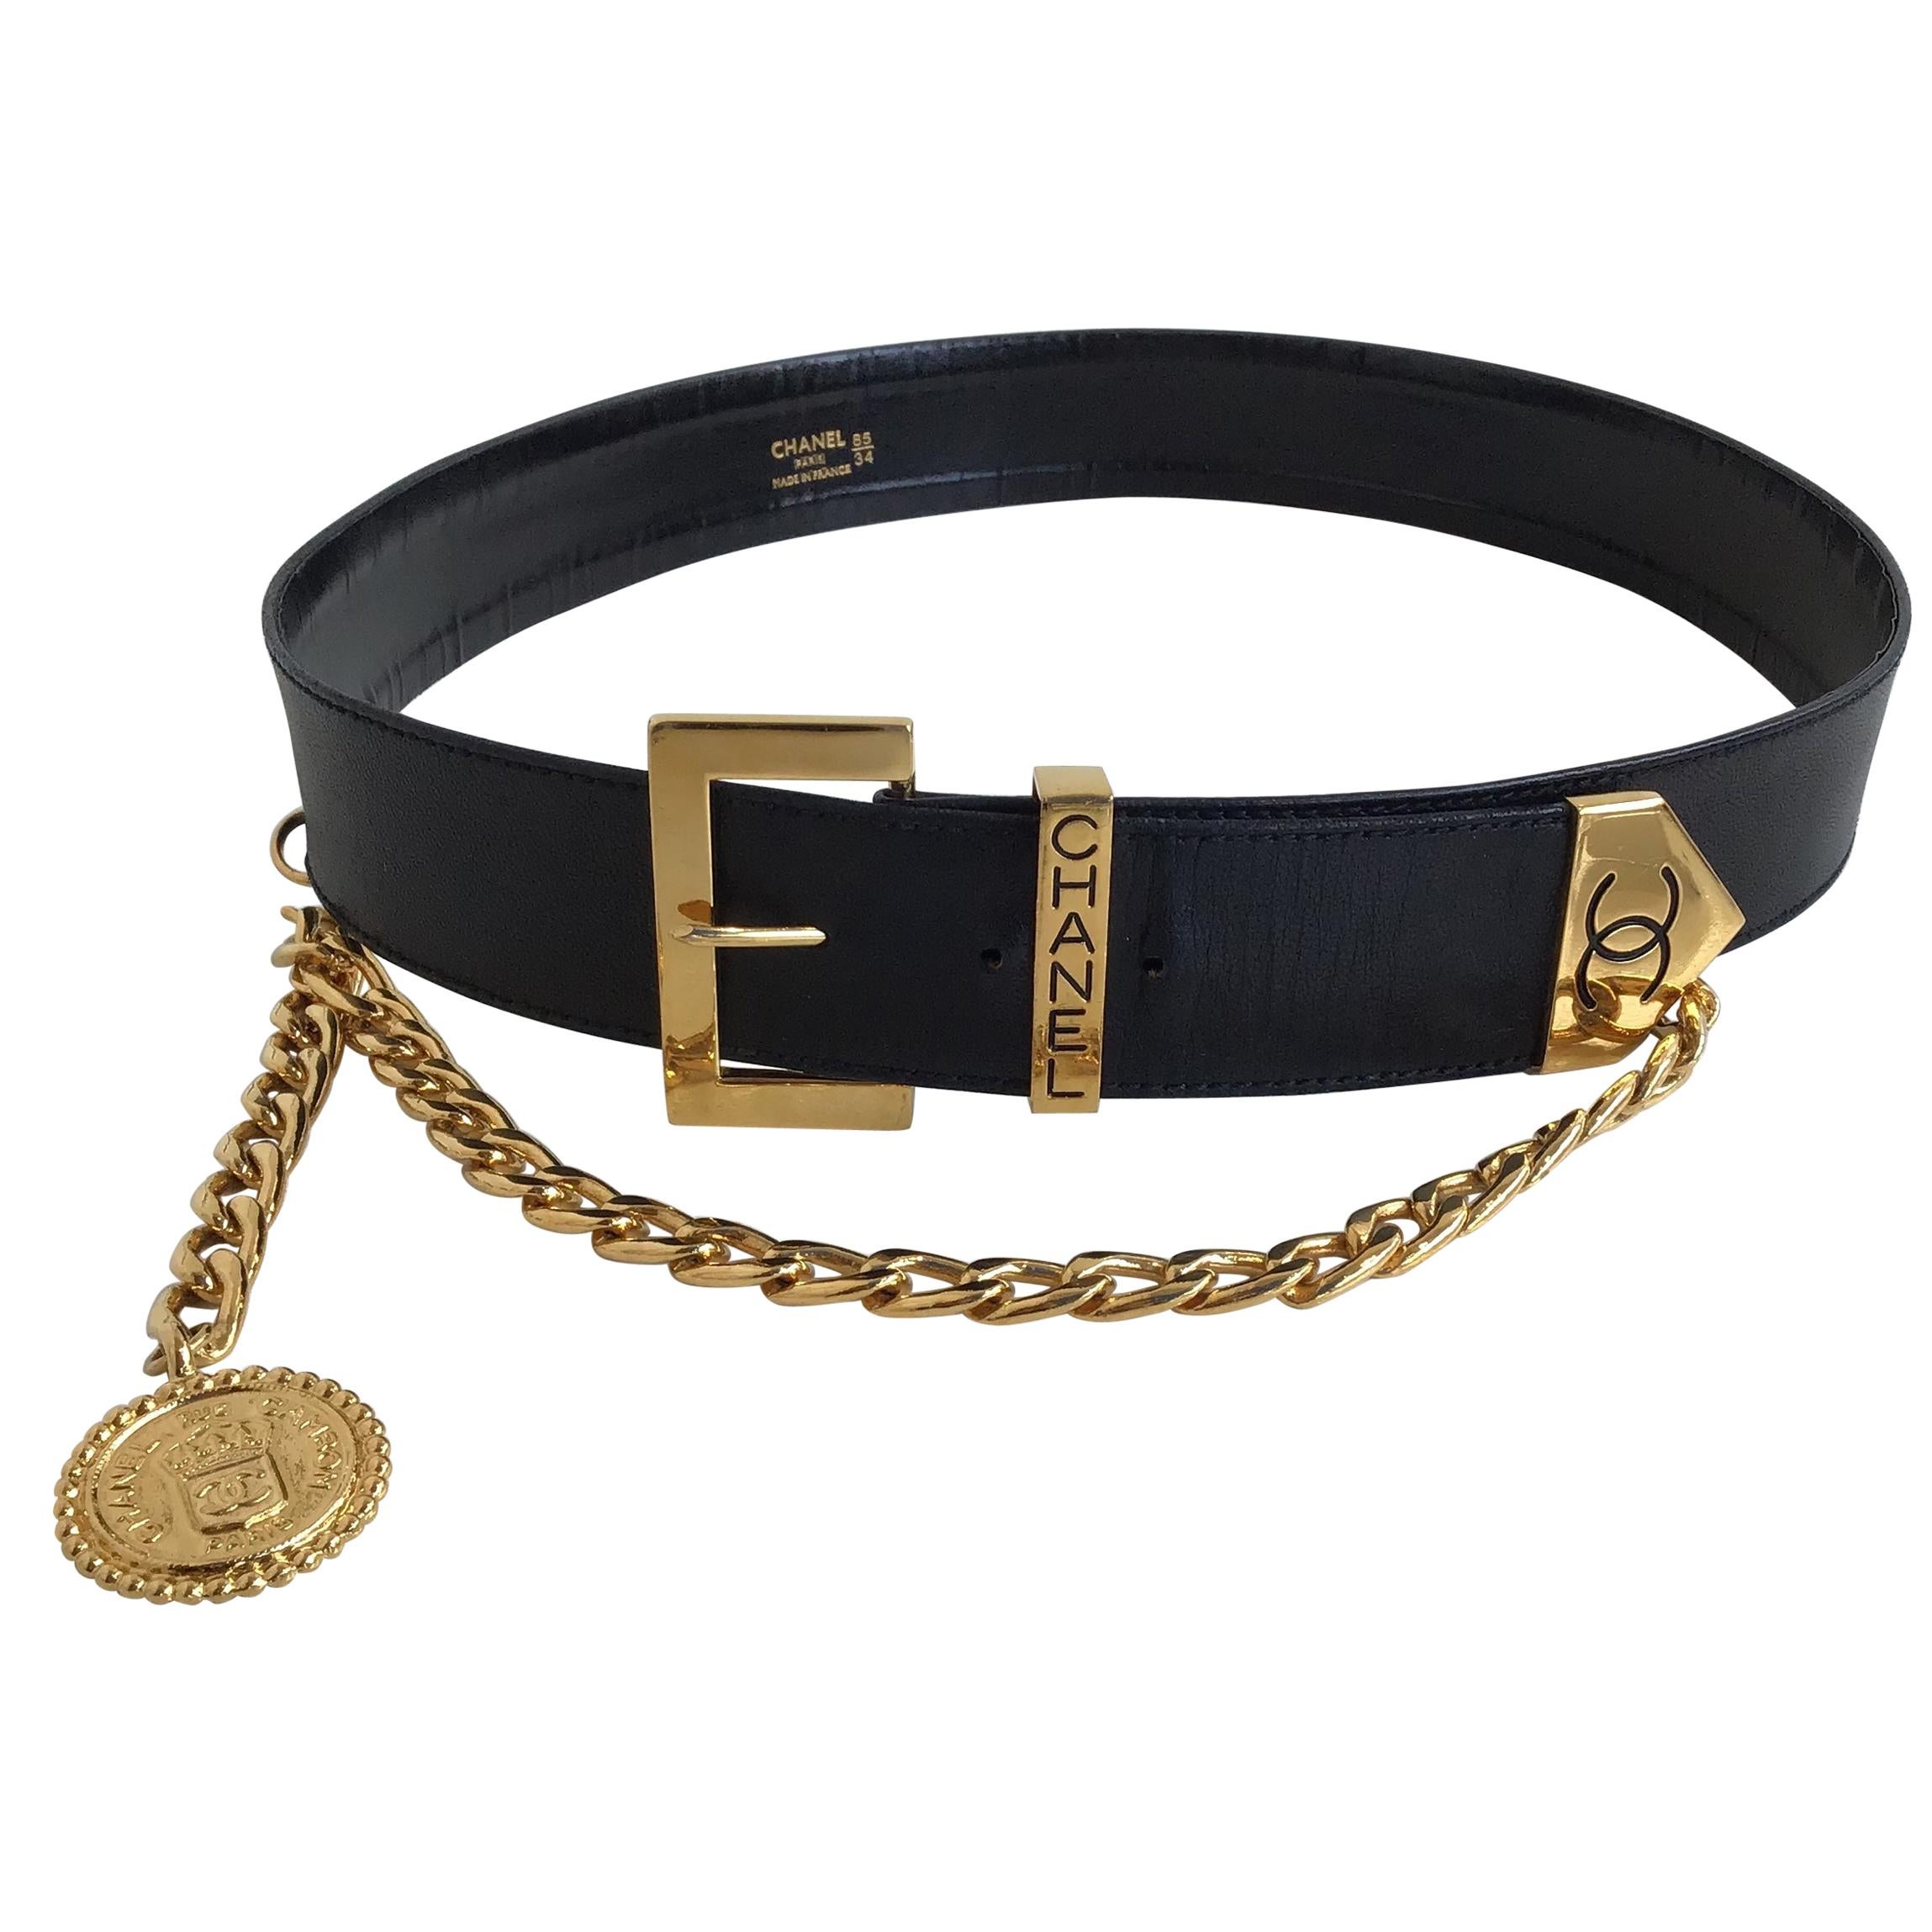 Chanel Black Leather Belt with Gold Chain